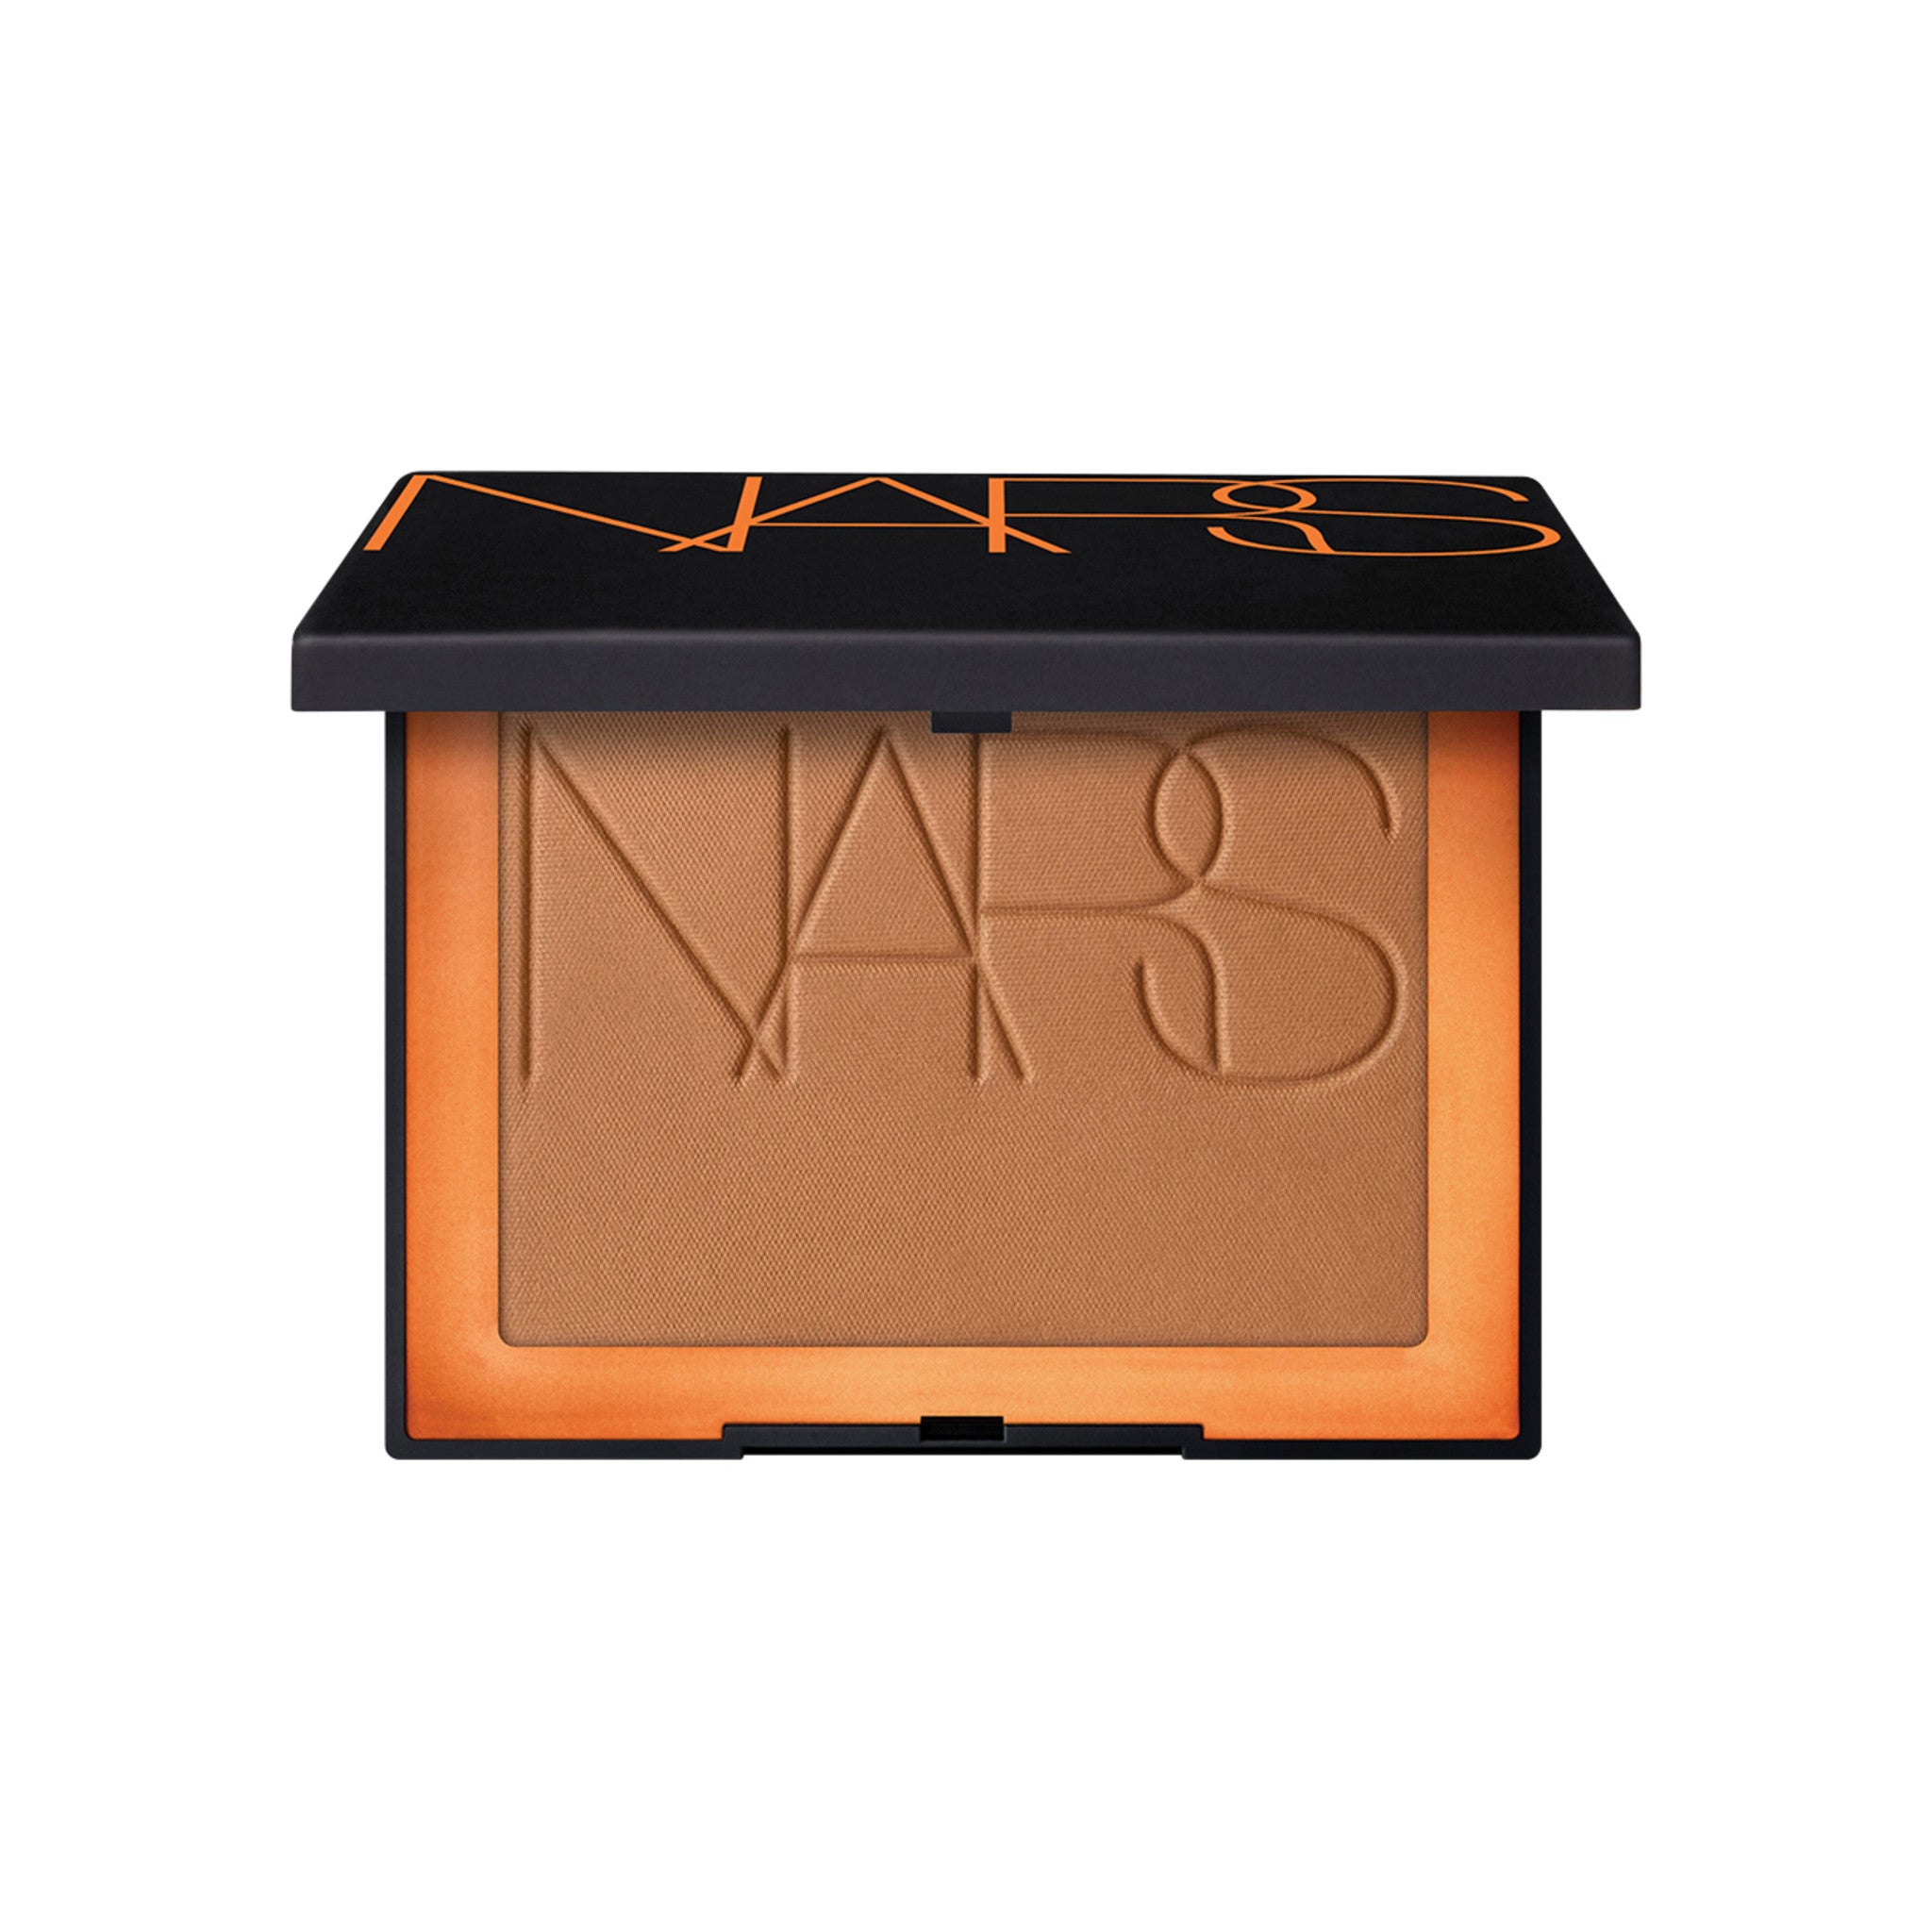 Nars Laguna Bronzing Powder Color/Shade variant: 03 main image. This product is for medium complexions